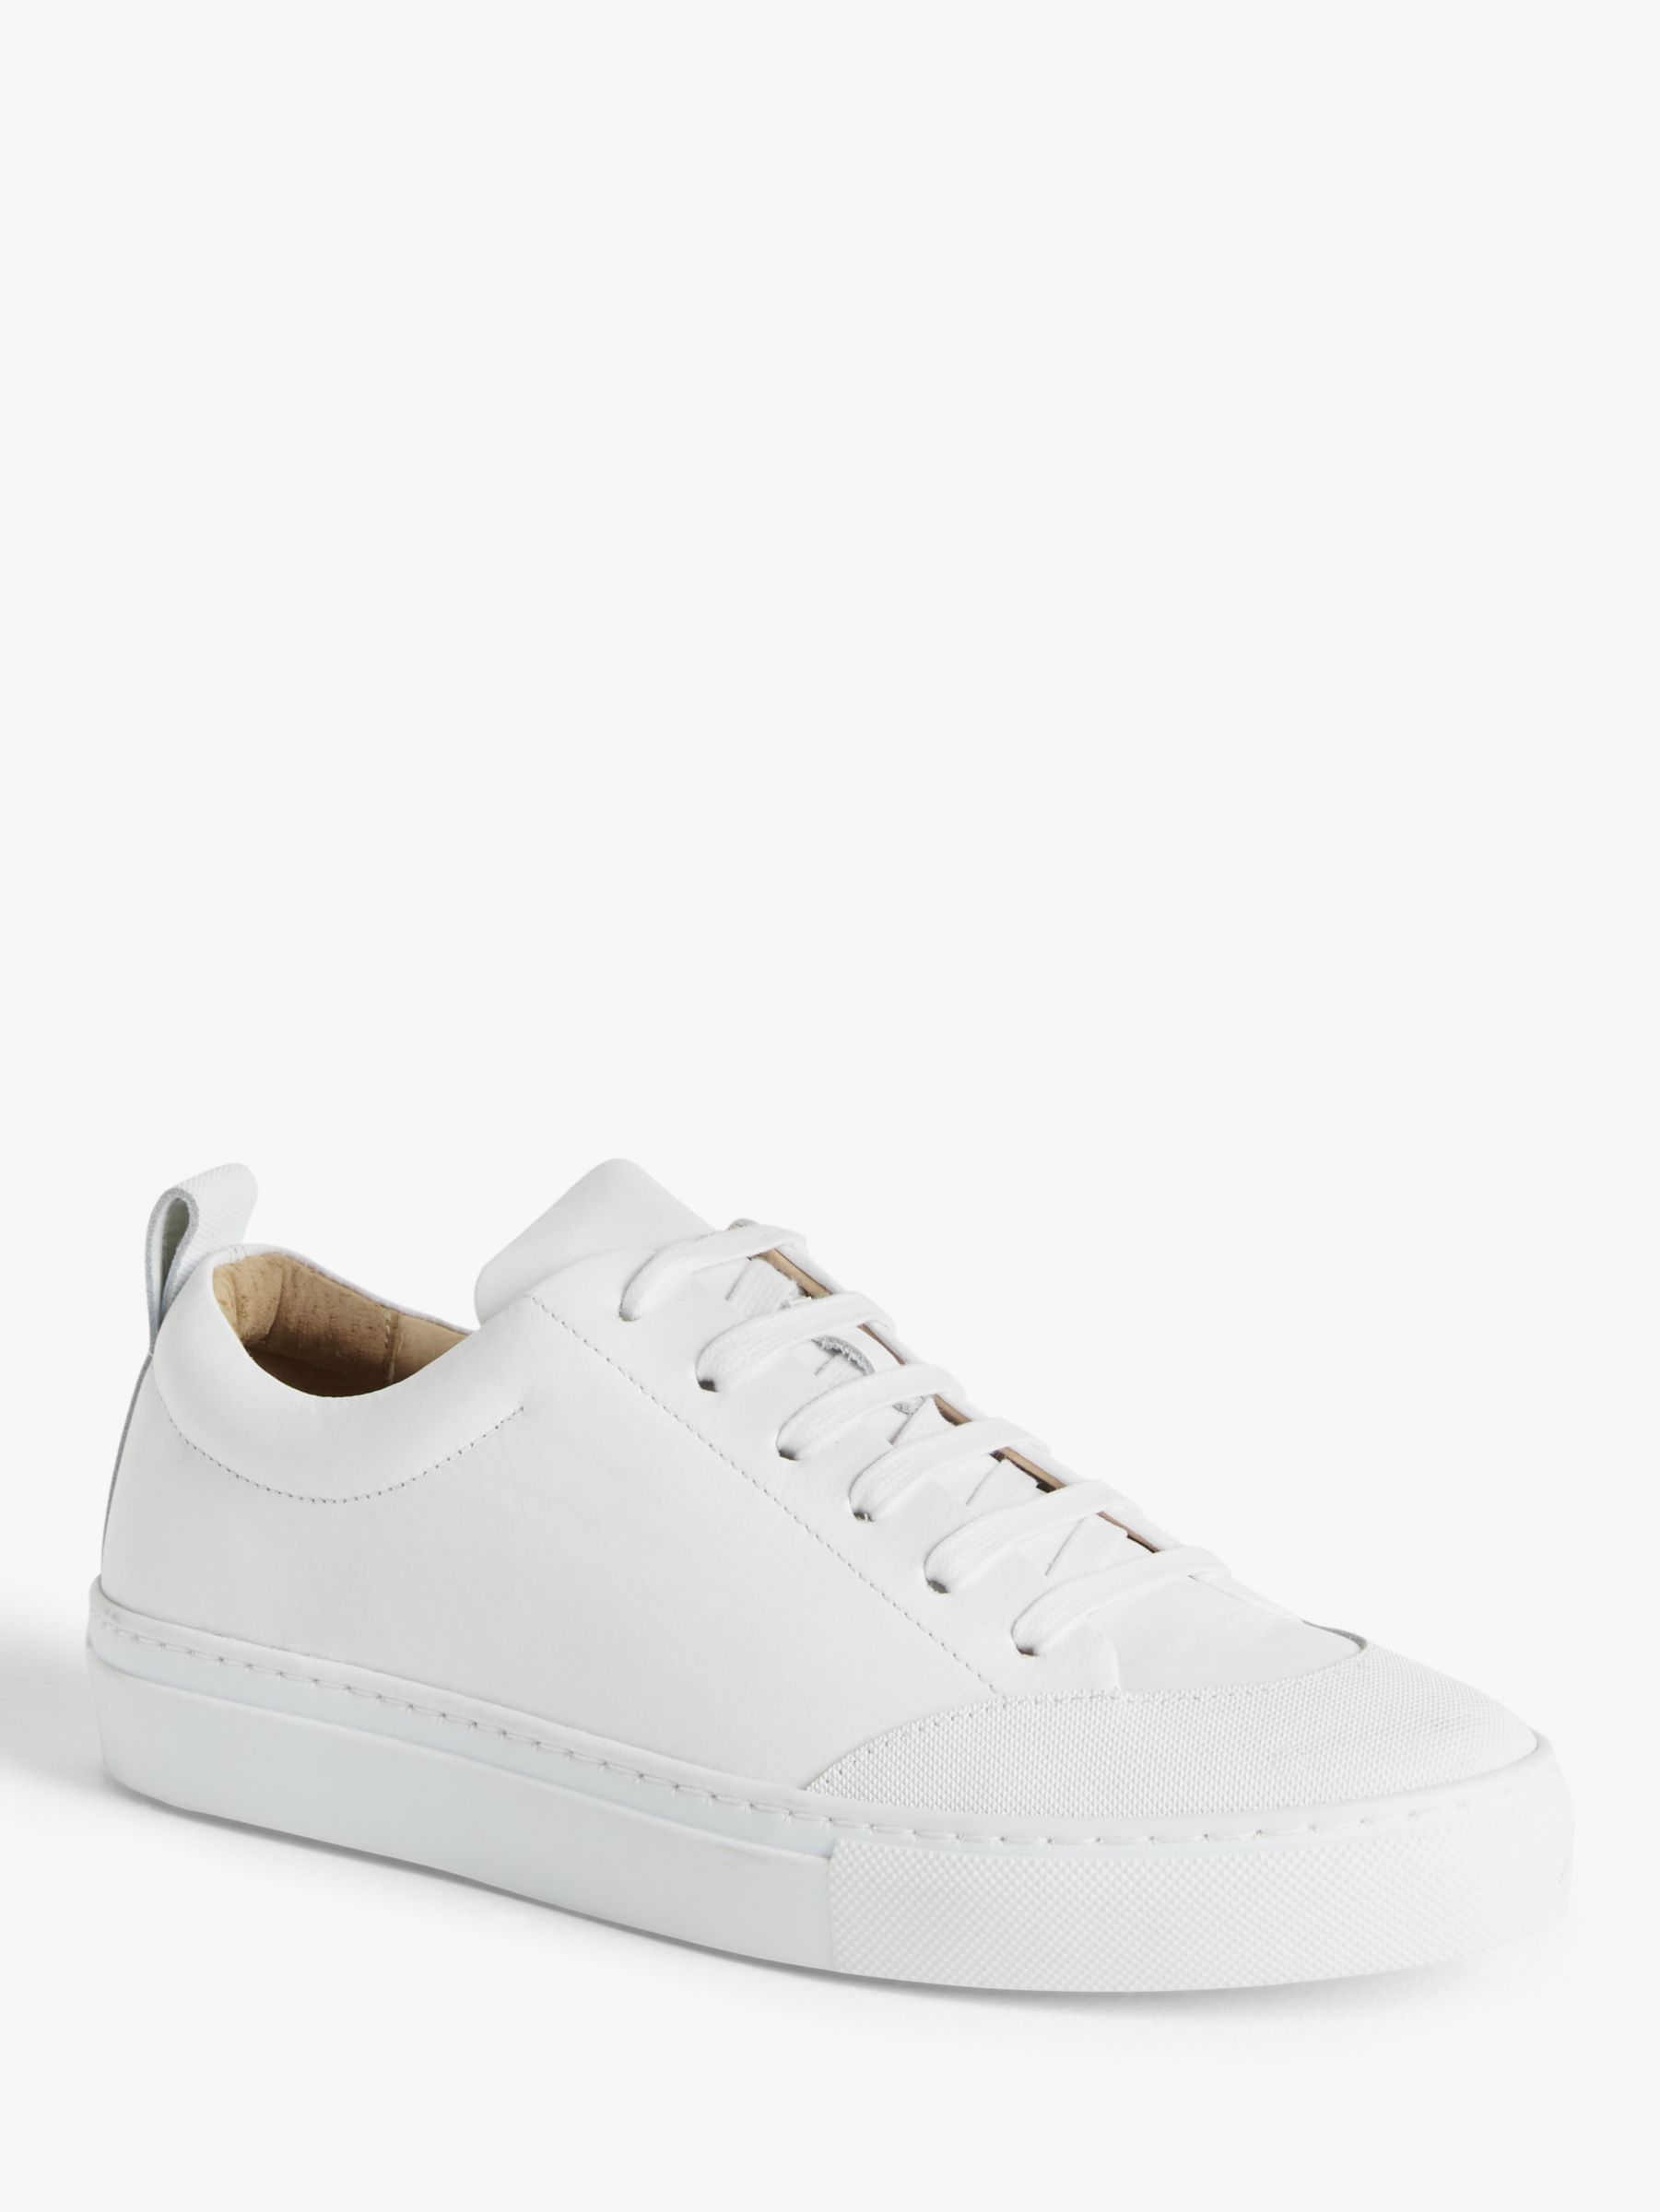 John Lewis & Partners Felicity Leather Trainers, White